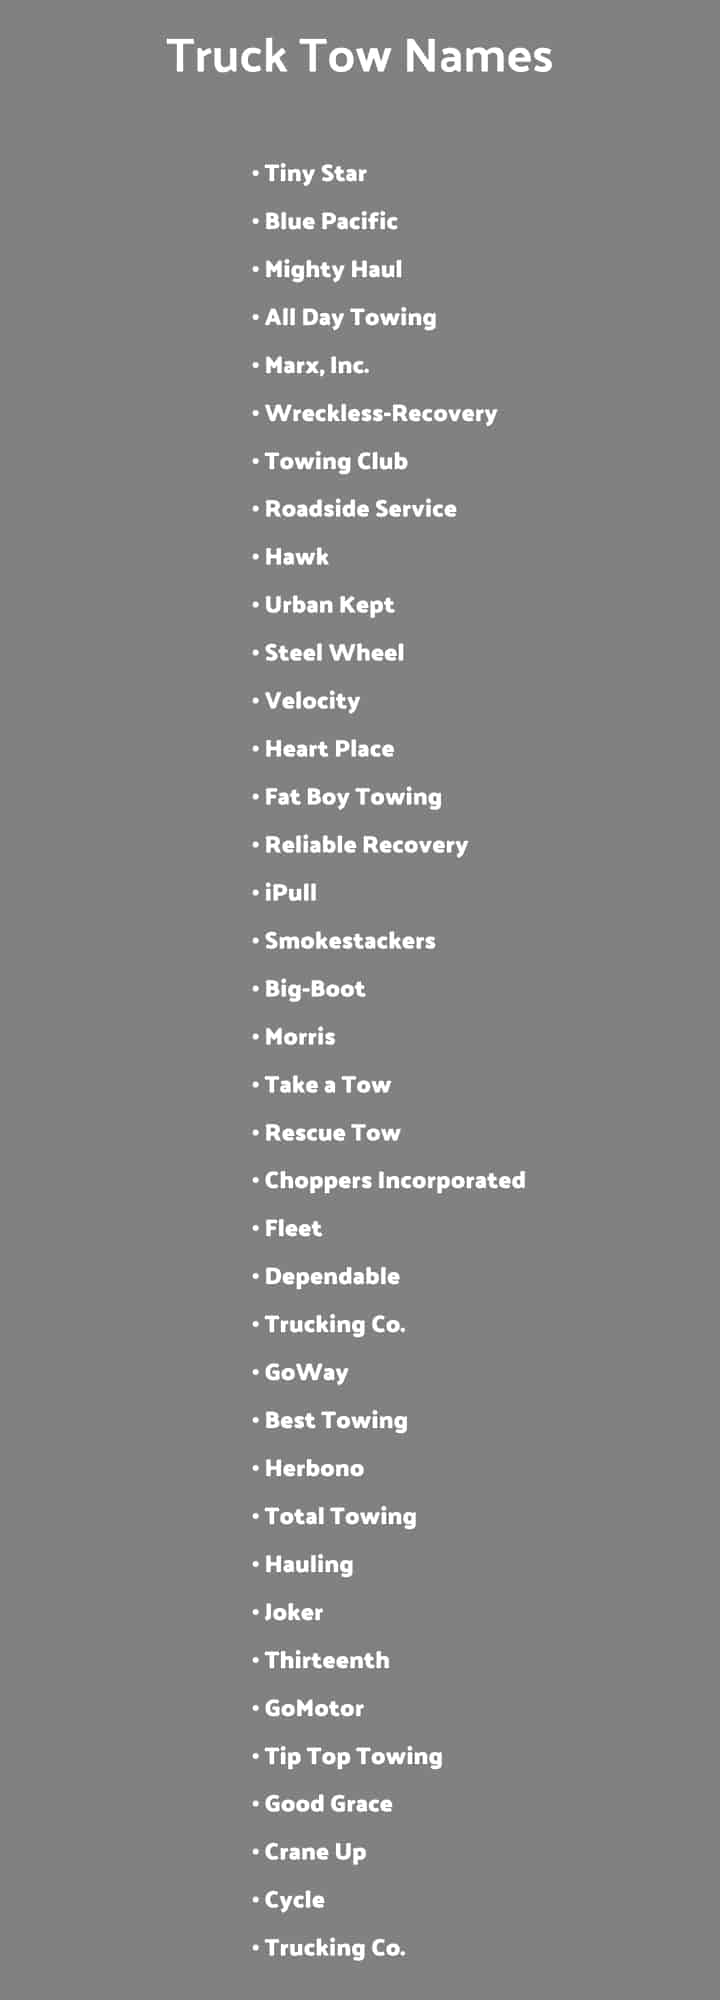 Towing Company Names List